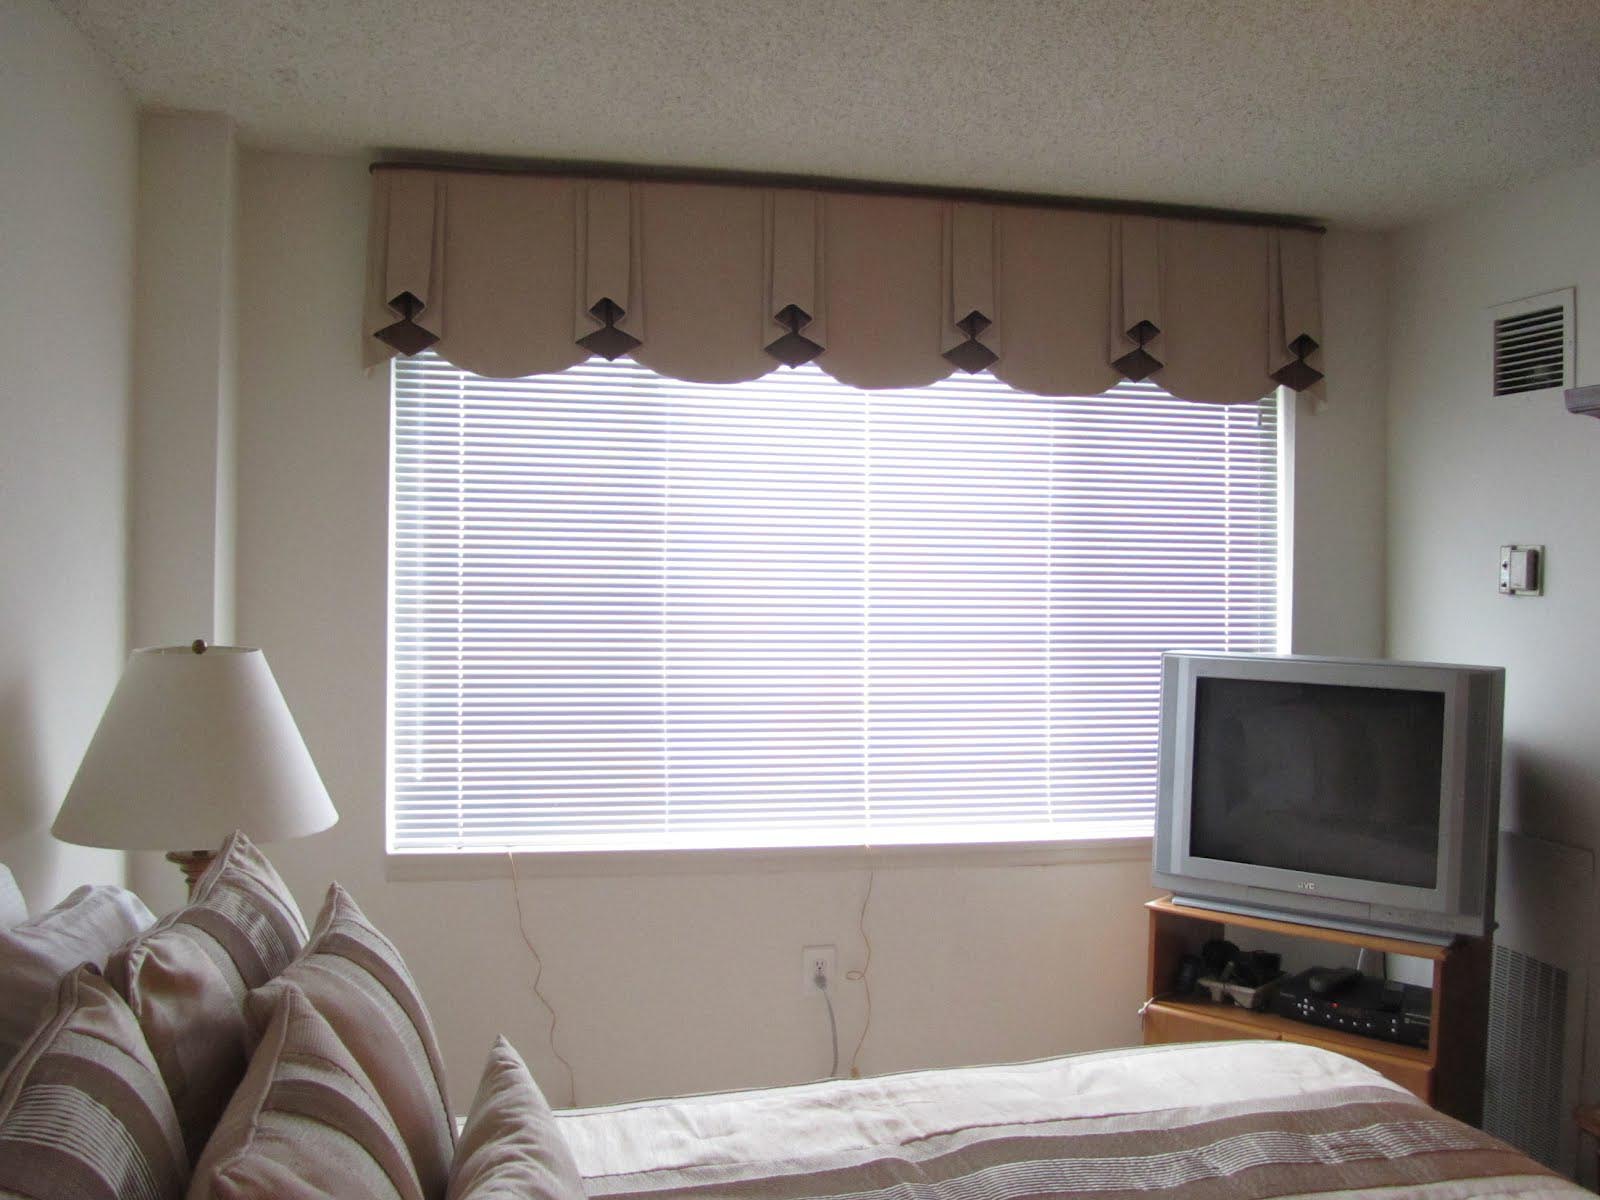 cascade valance bay window bedroom curtains with cornice home elements and style